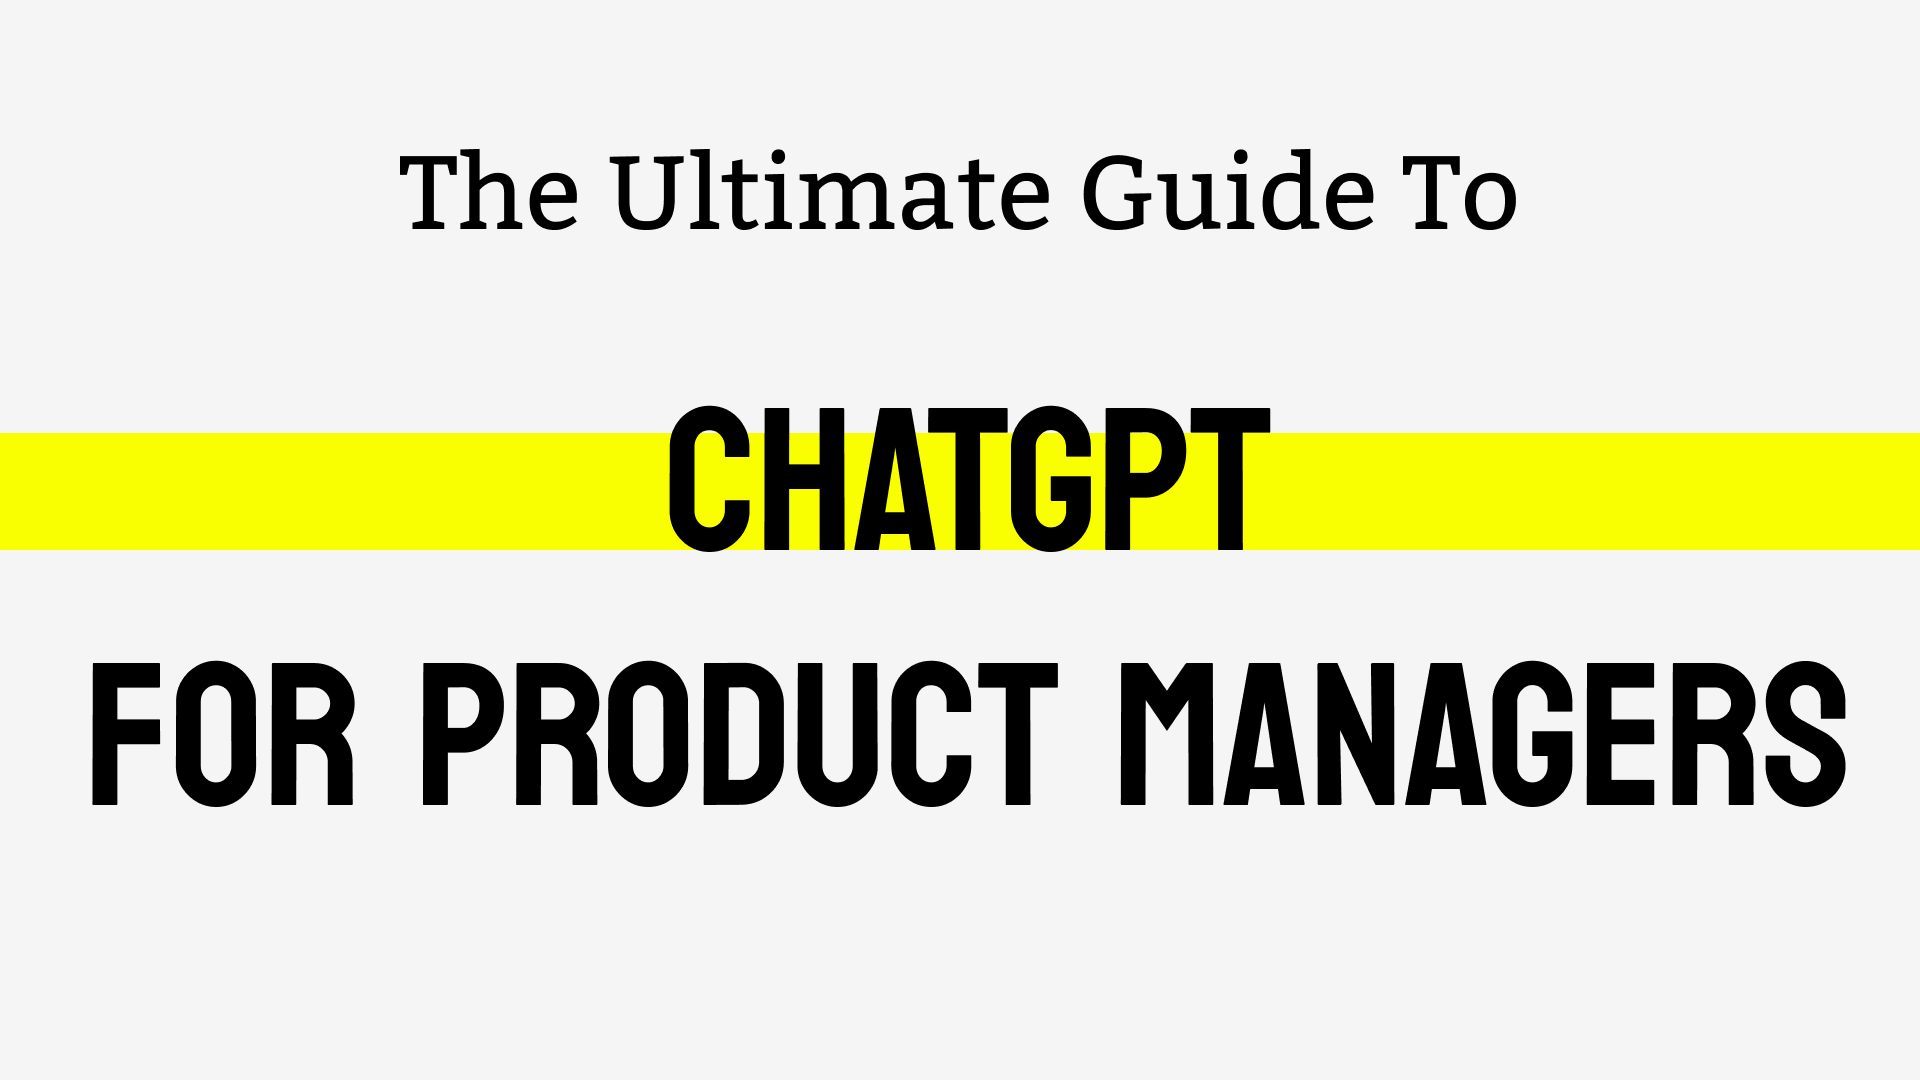 ChatGPT for Product Managers. The Ultimate Guide
